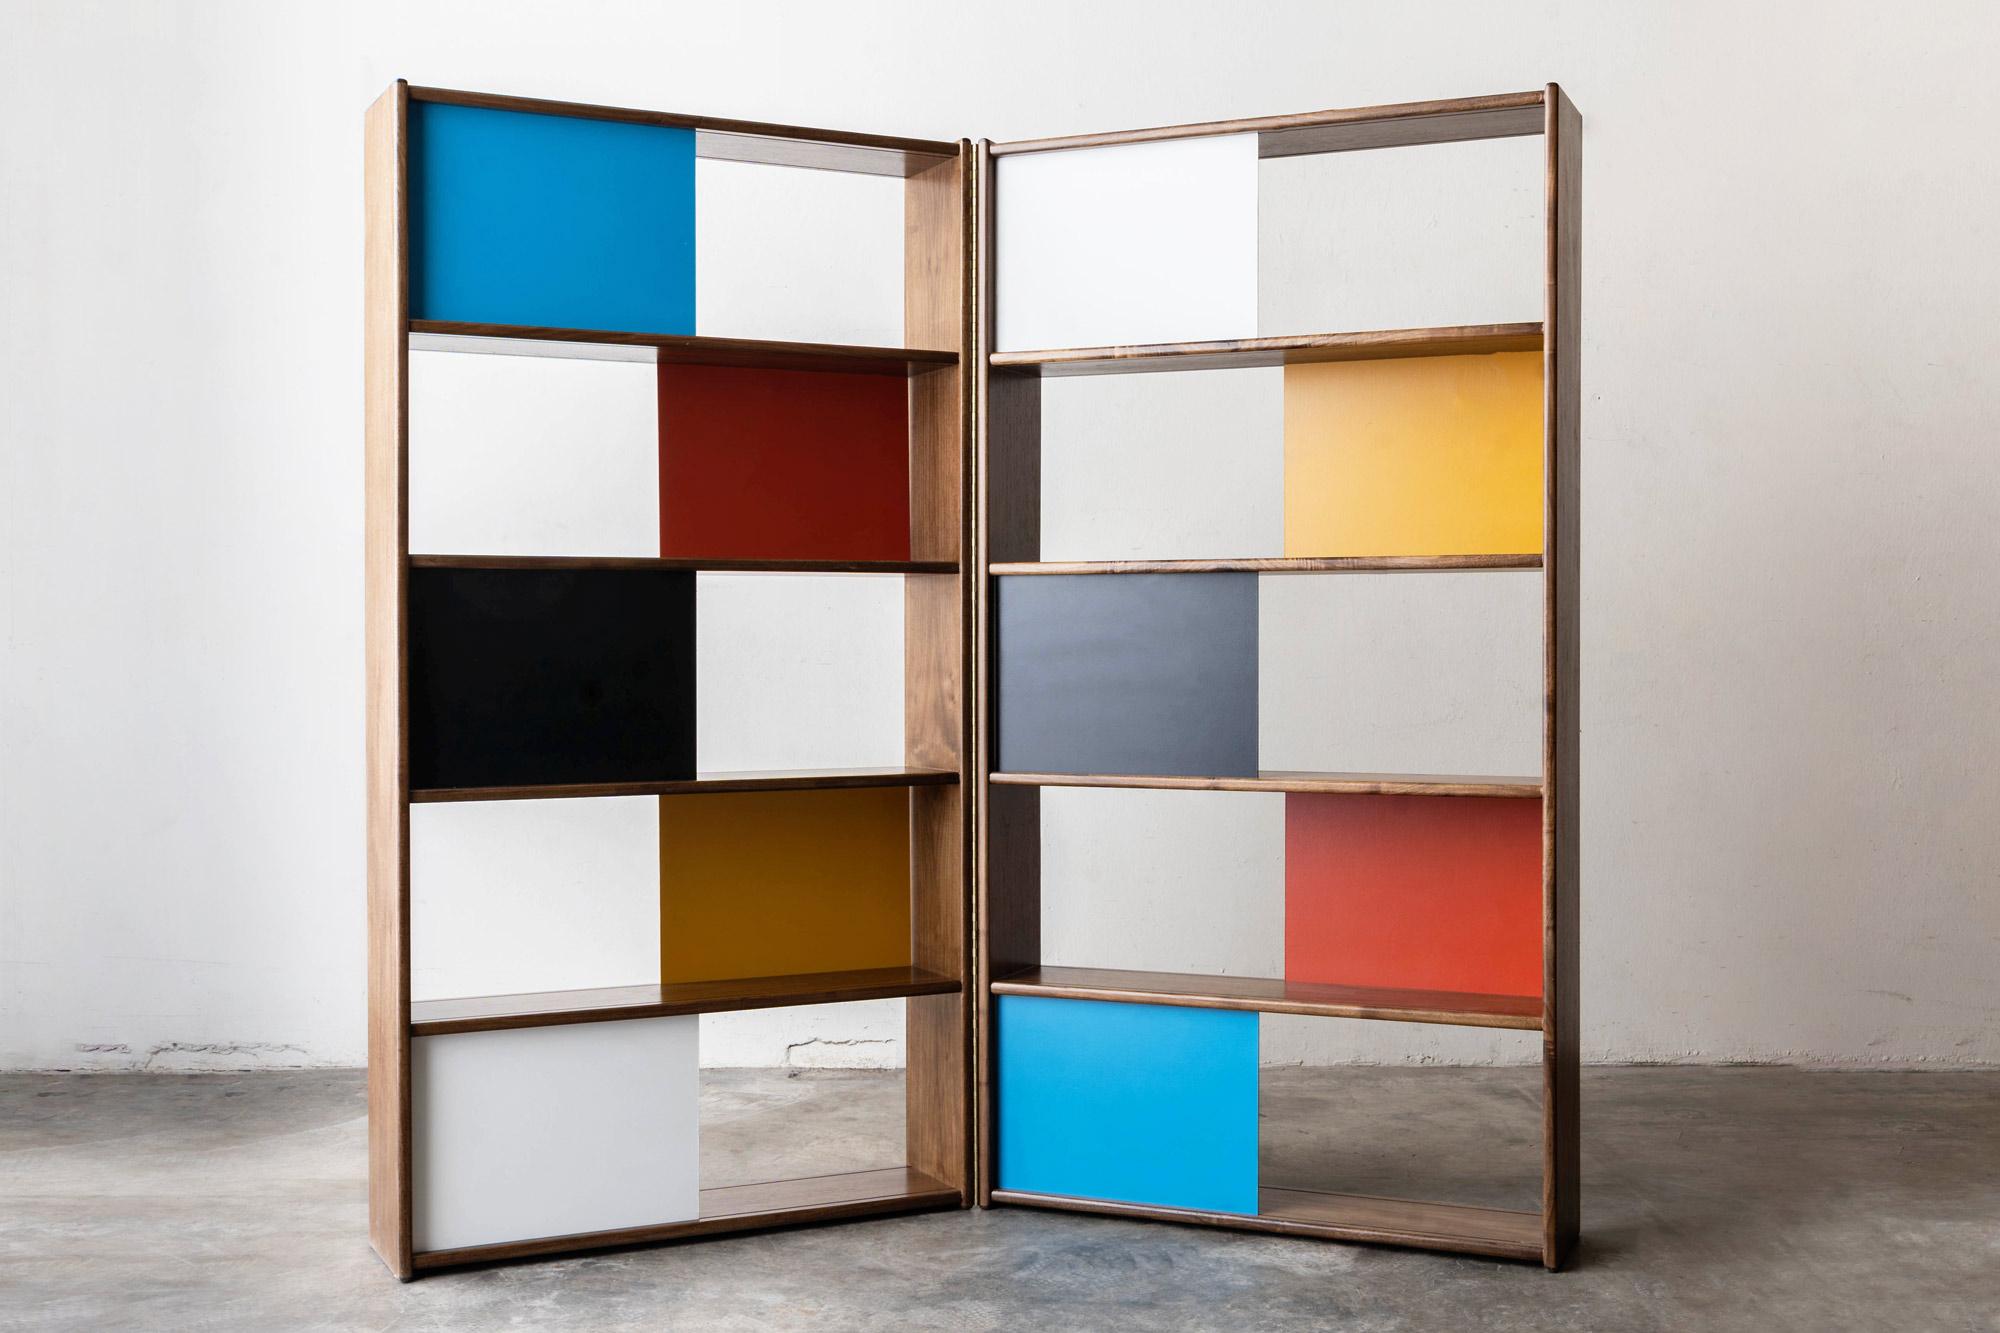 Walnut, colored masonite and brass bookcase/room divider designed by Evans Clark for Glenn of California. Sliding Mondrian style colored panels and a 60